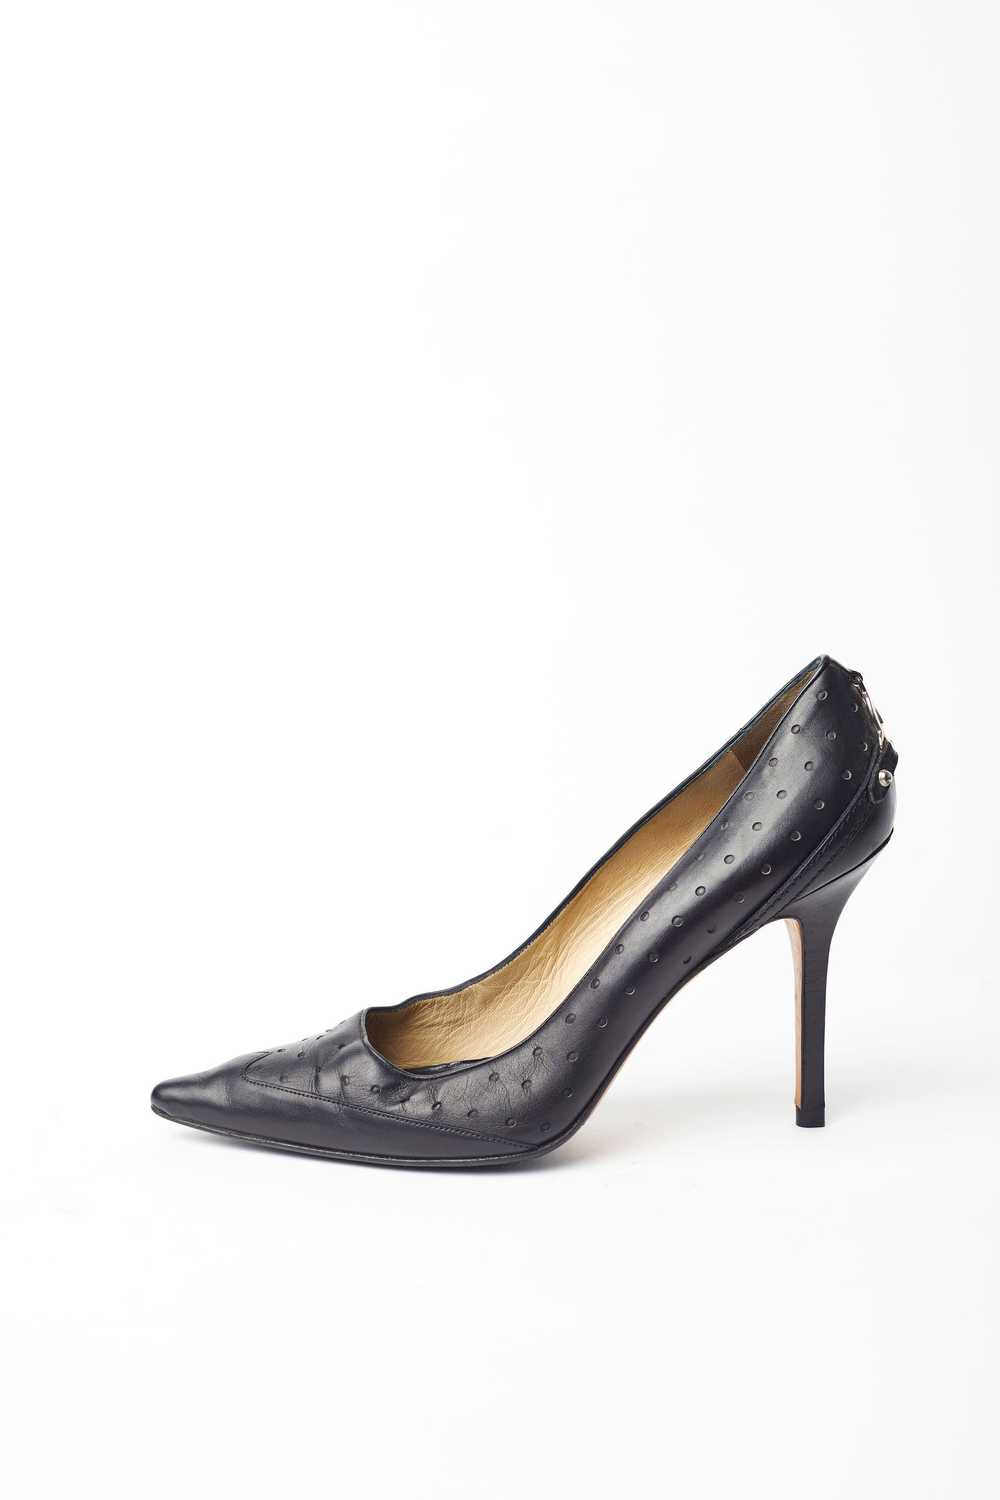 Gucci Y2K Tom Ford perforated leather logo pumps - image 4